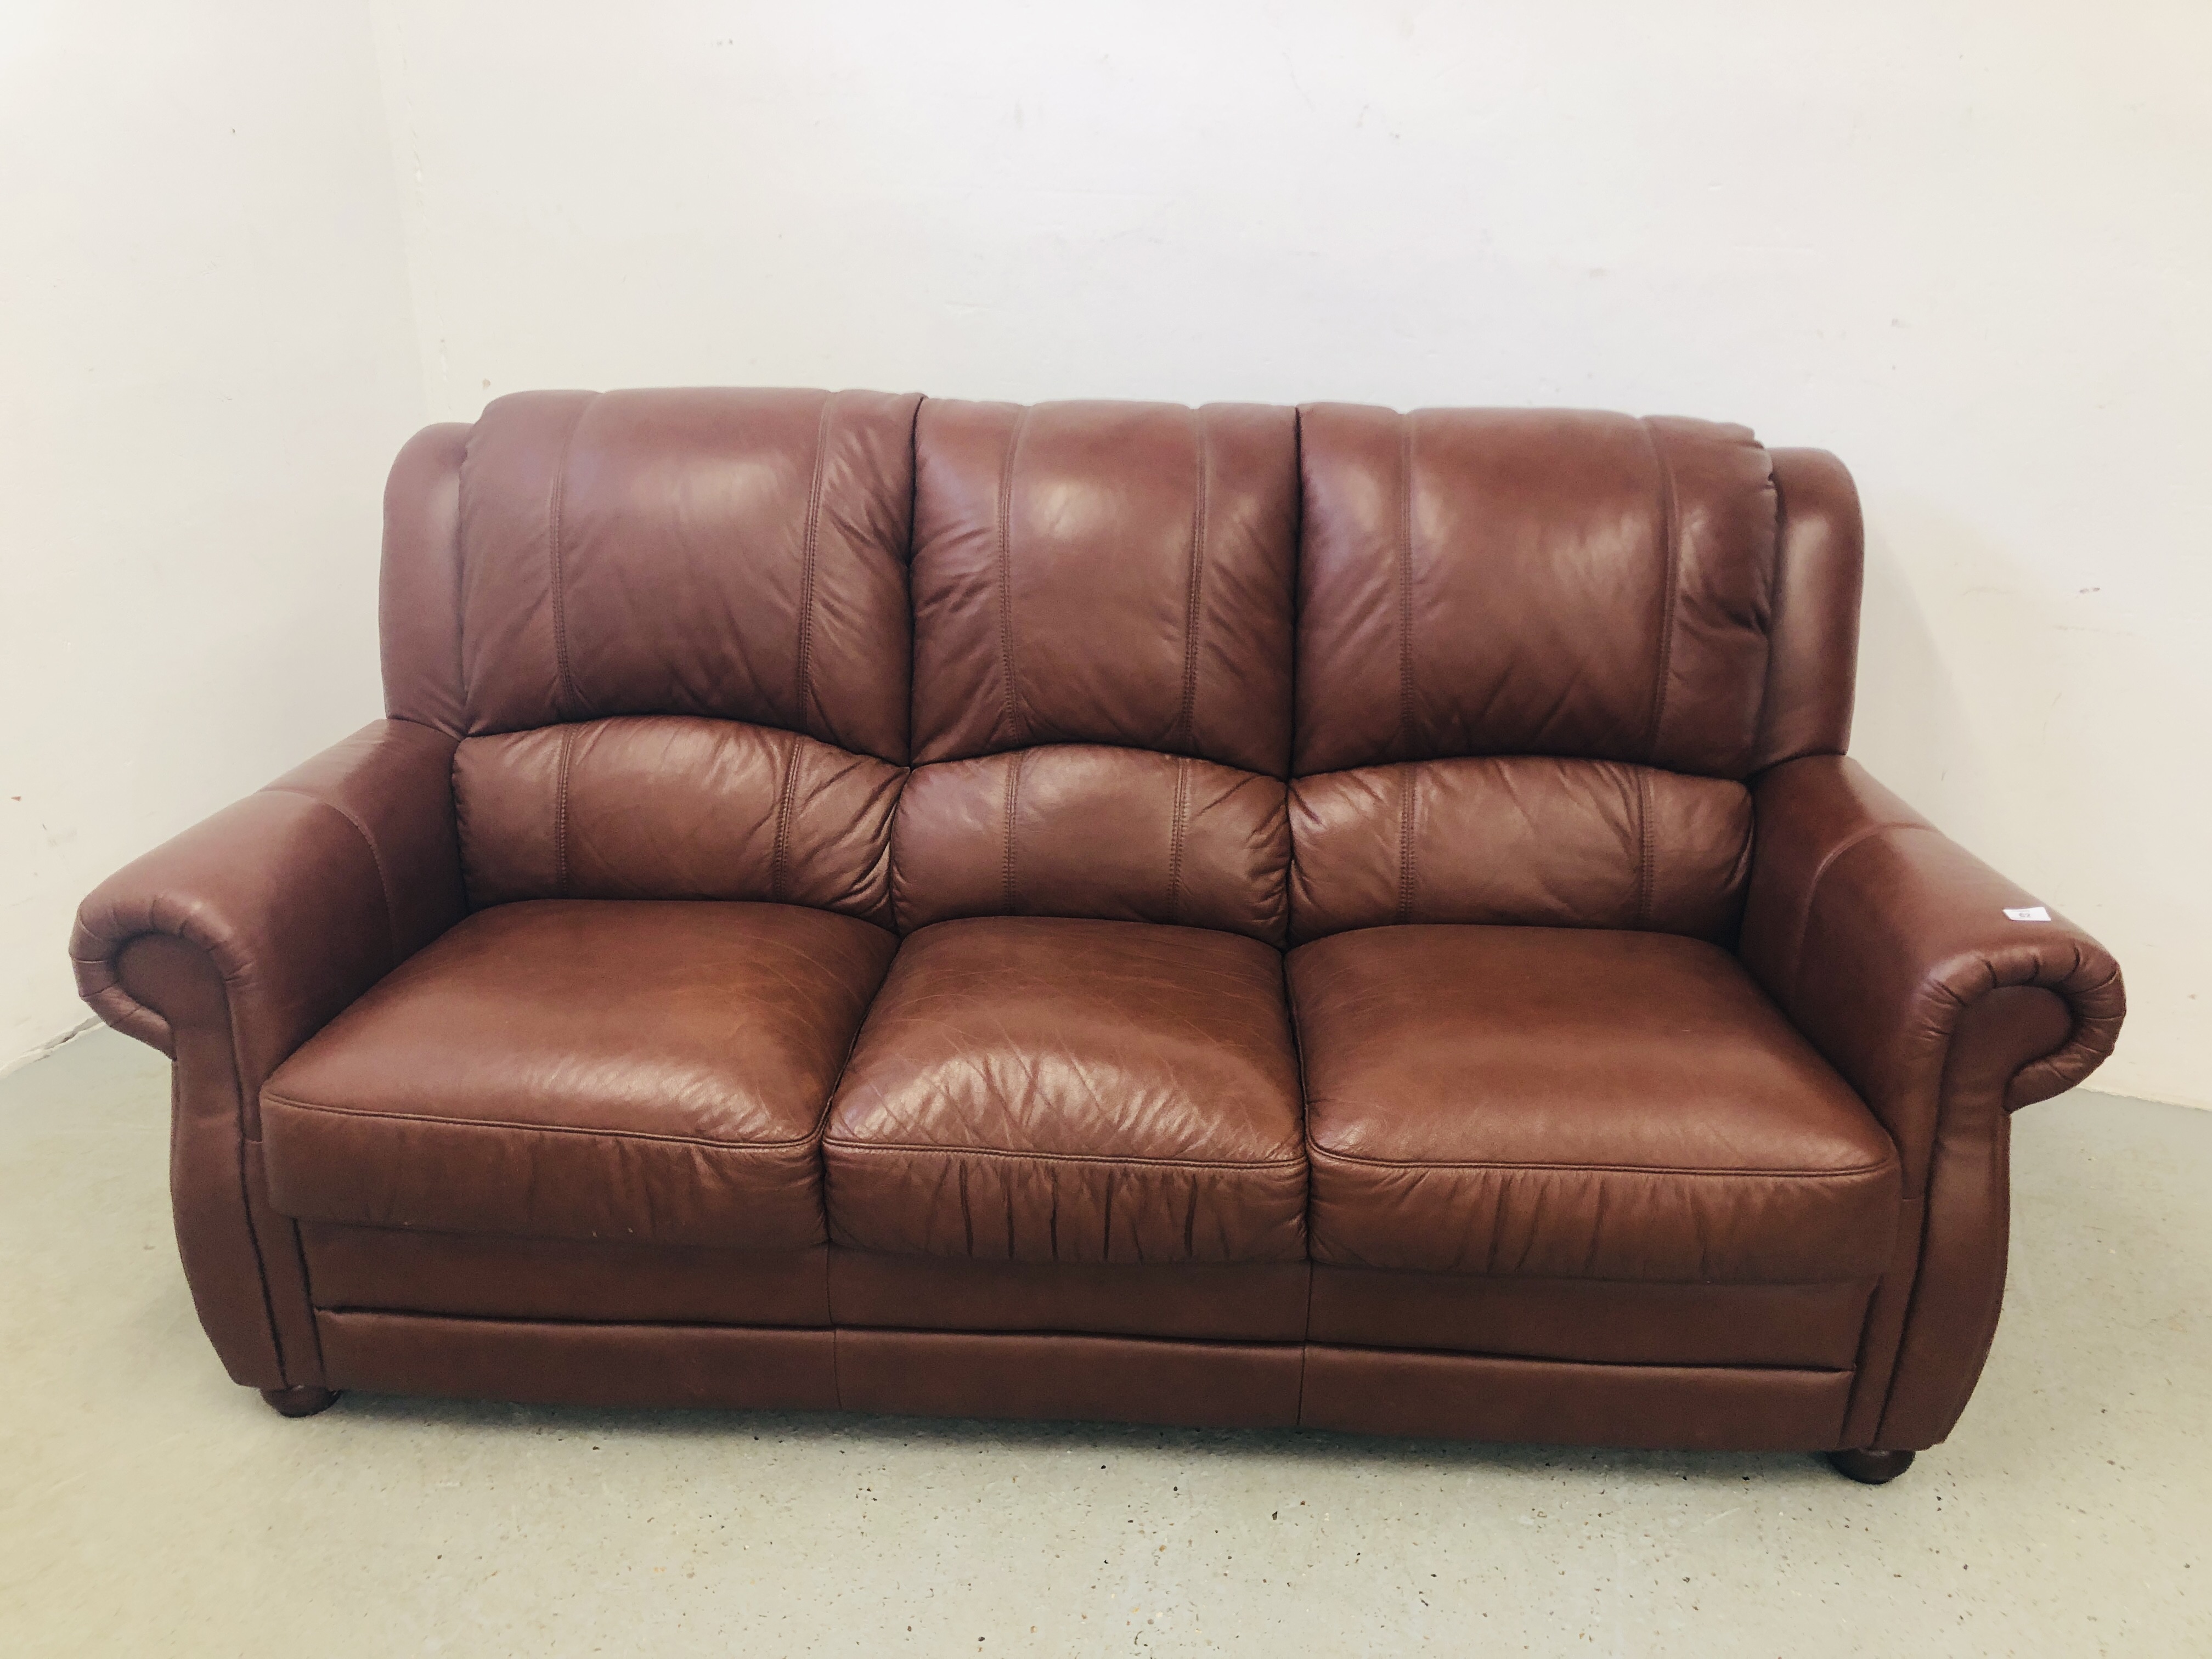 DESIGNER 3 SEATER BROWN LEATHER SOFA - Image 2 of 15